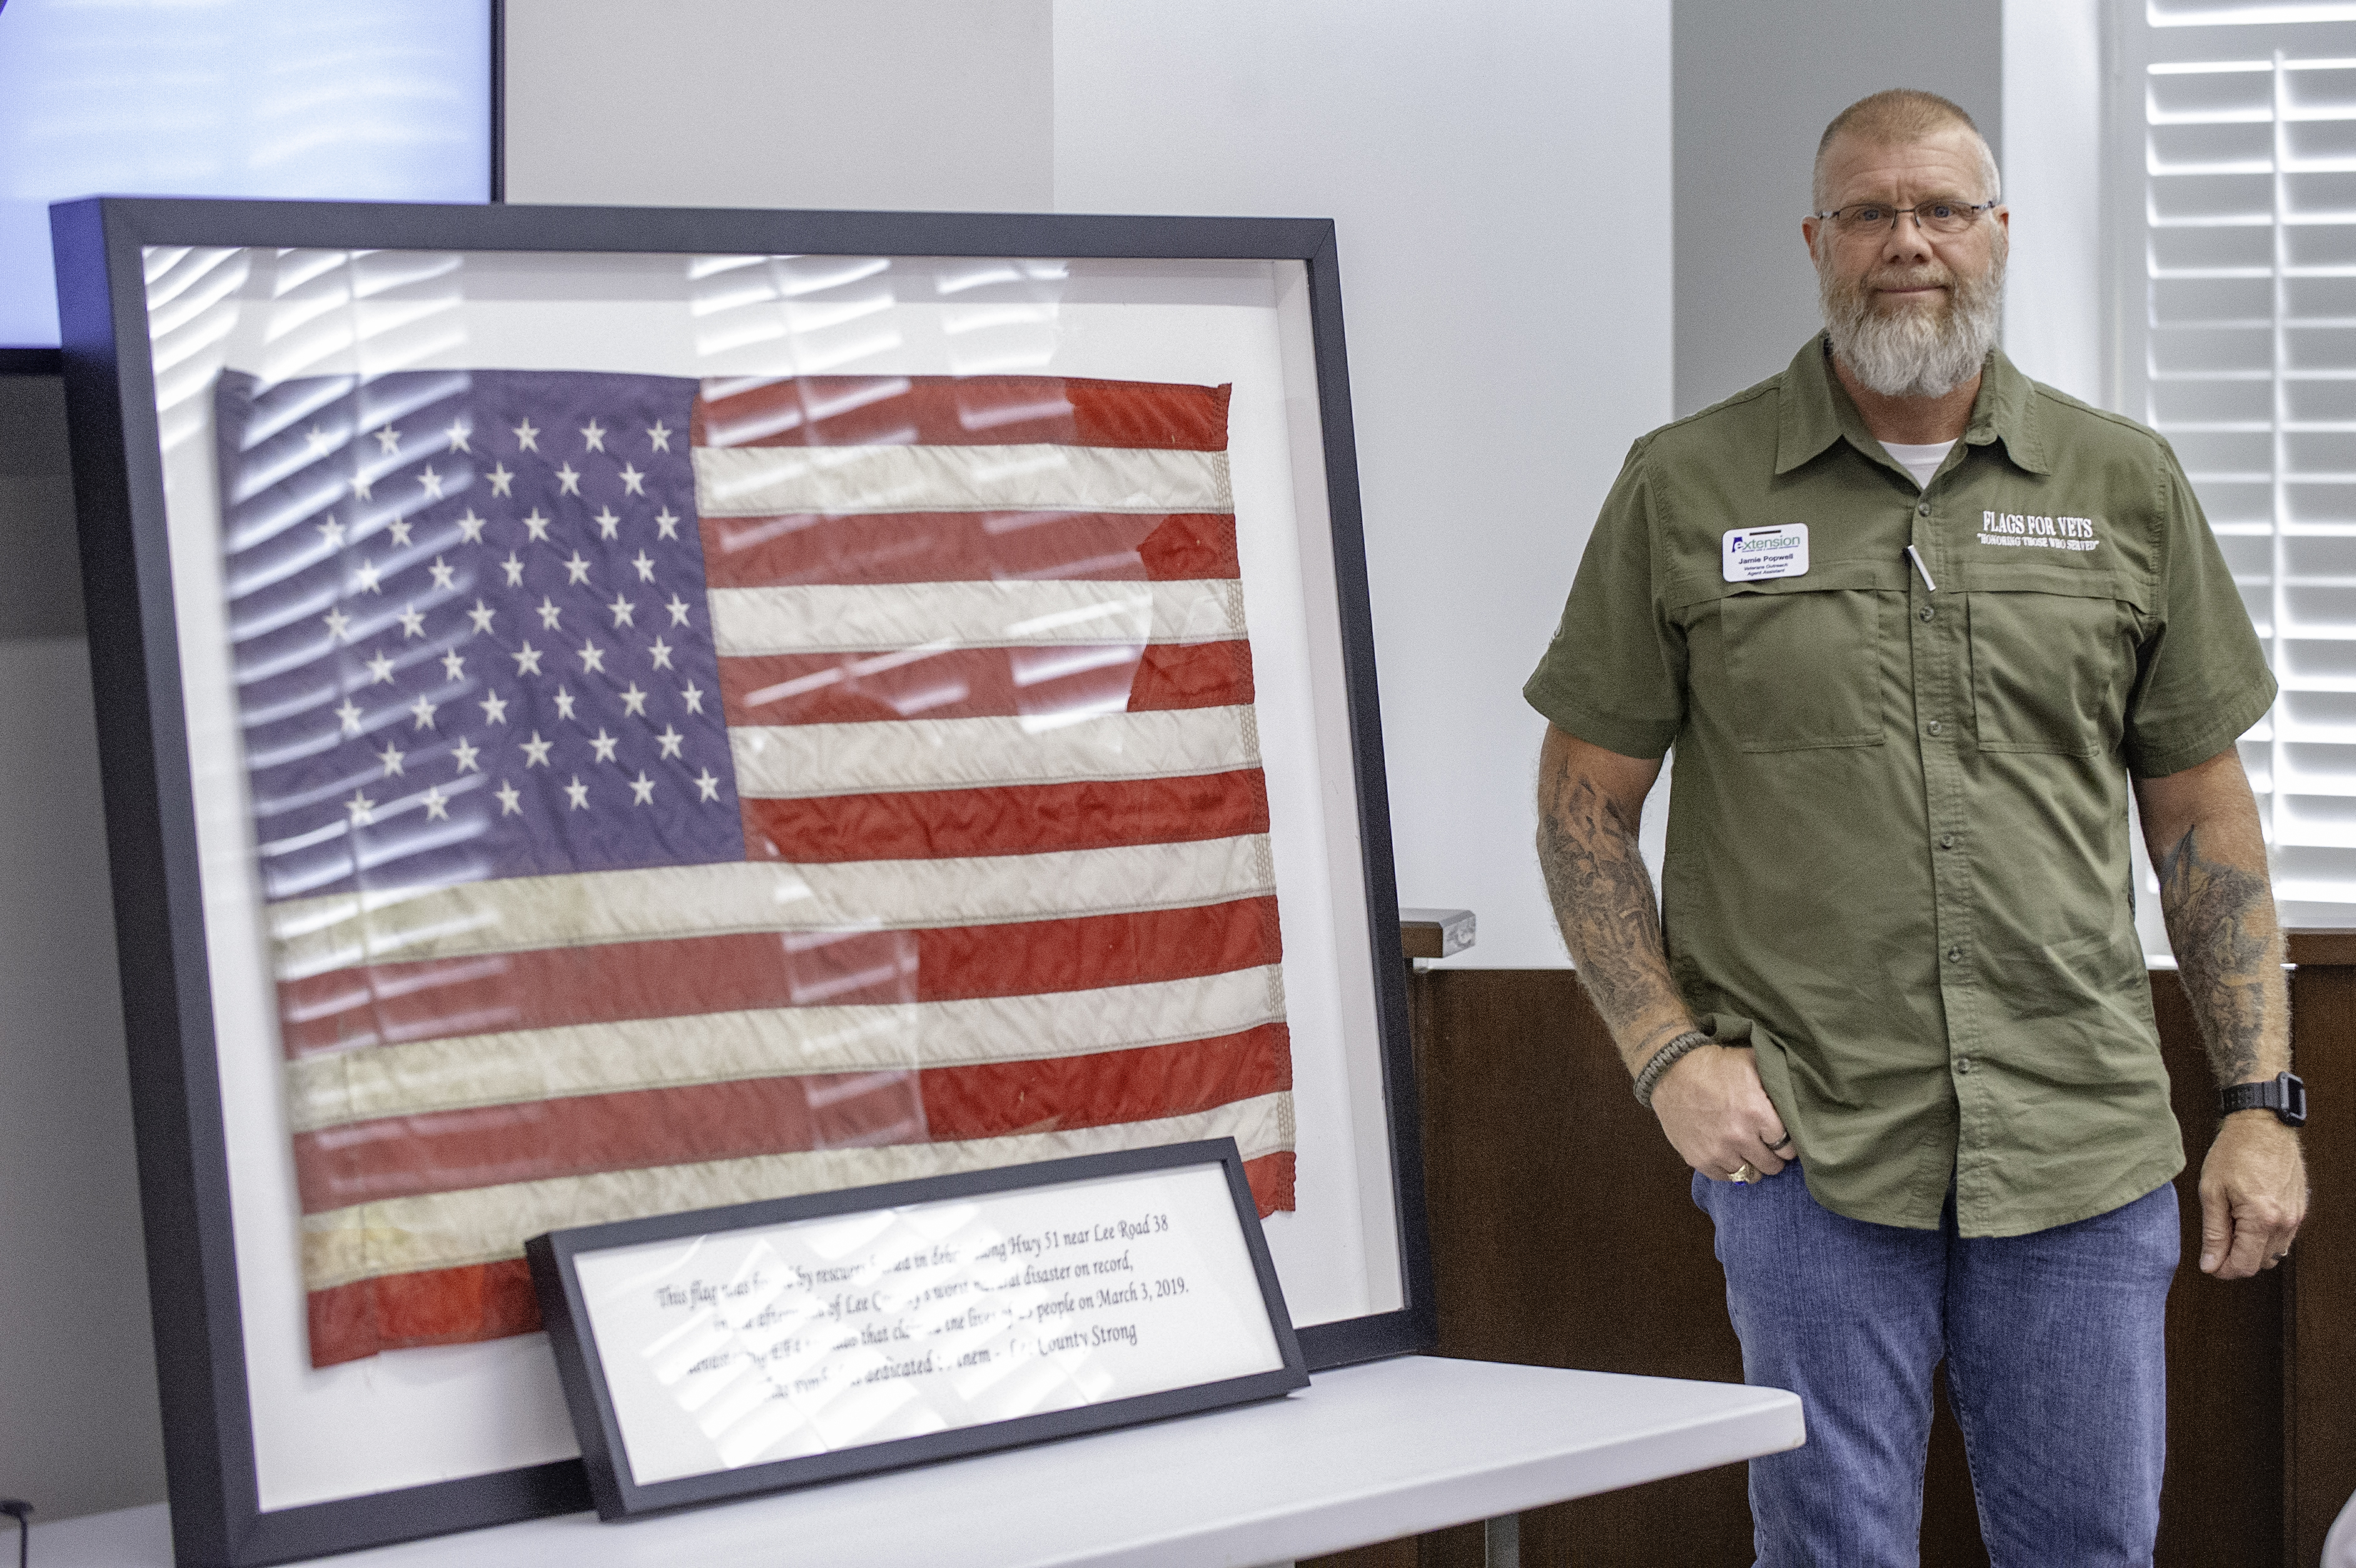 Opelika’s Jamie Popwell presents flag found in rubble of March 3 tornadoes to members of Lee County Commission